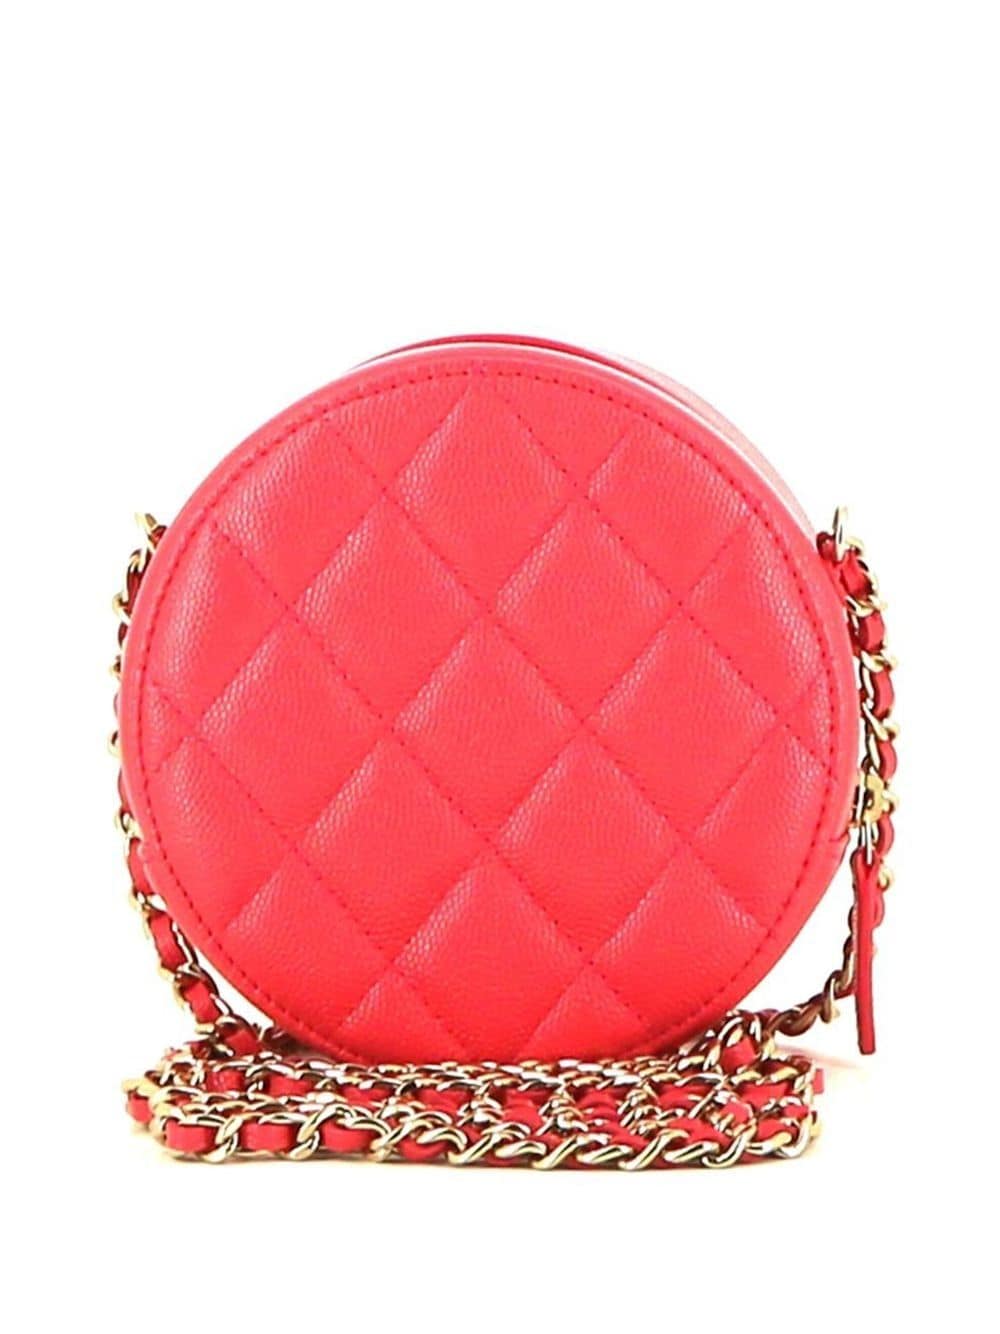 Chanel Mini Round Vanity Bag Handle With Care Pink Caviar 22C – Coco  Approved Studio